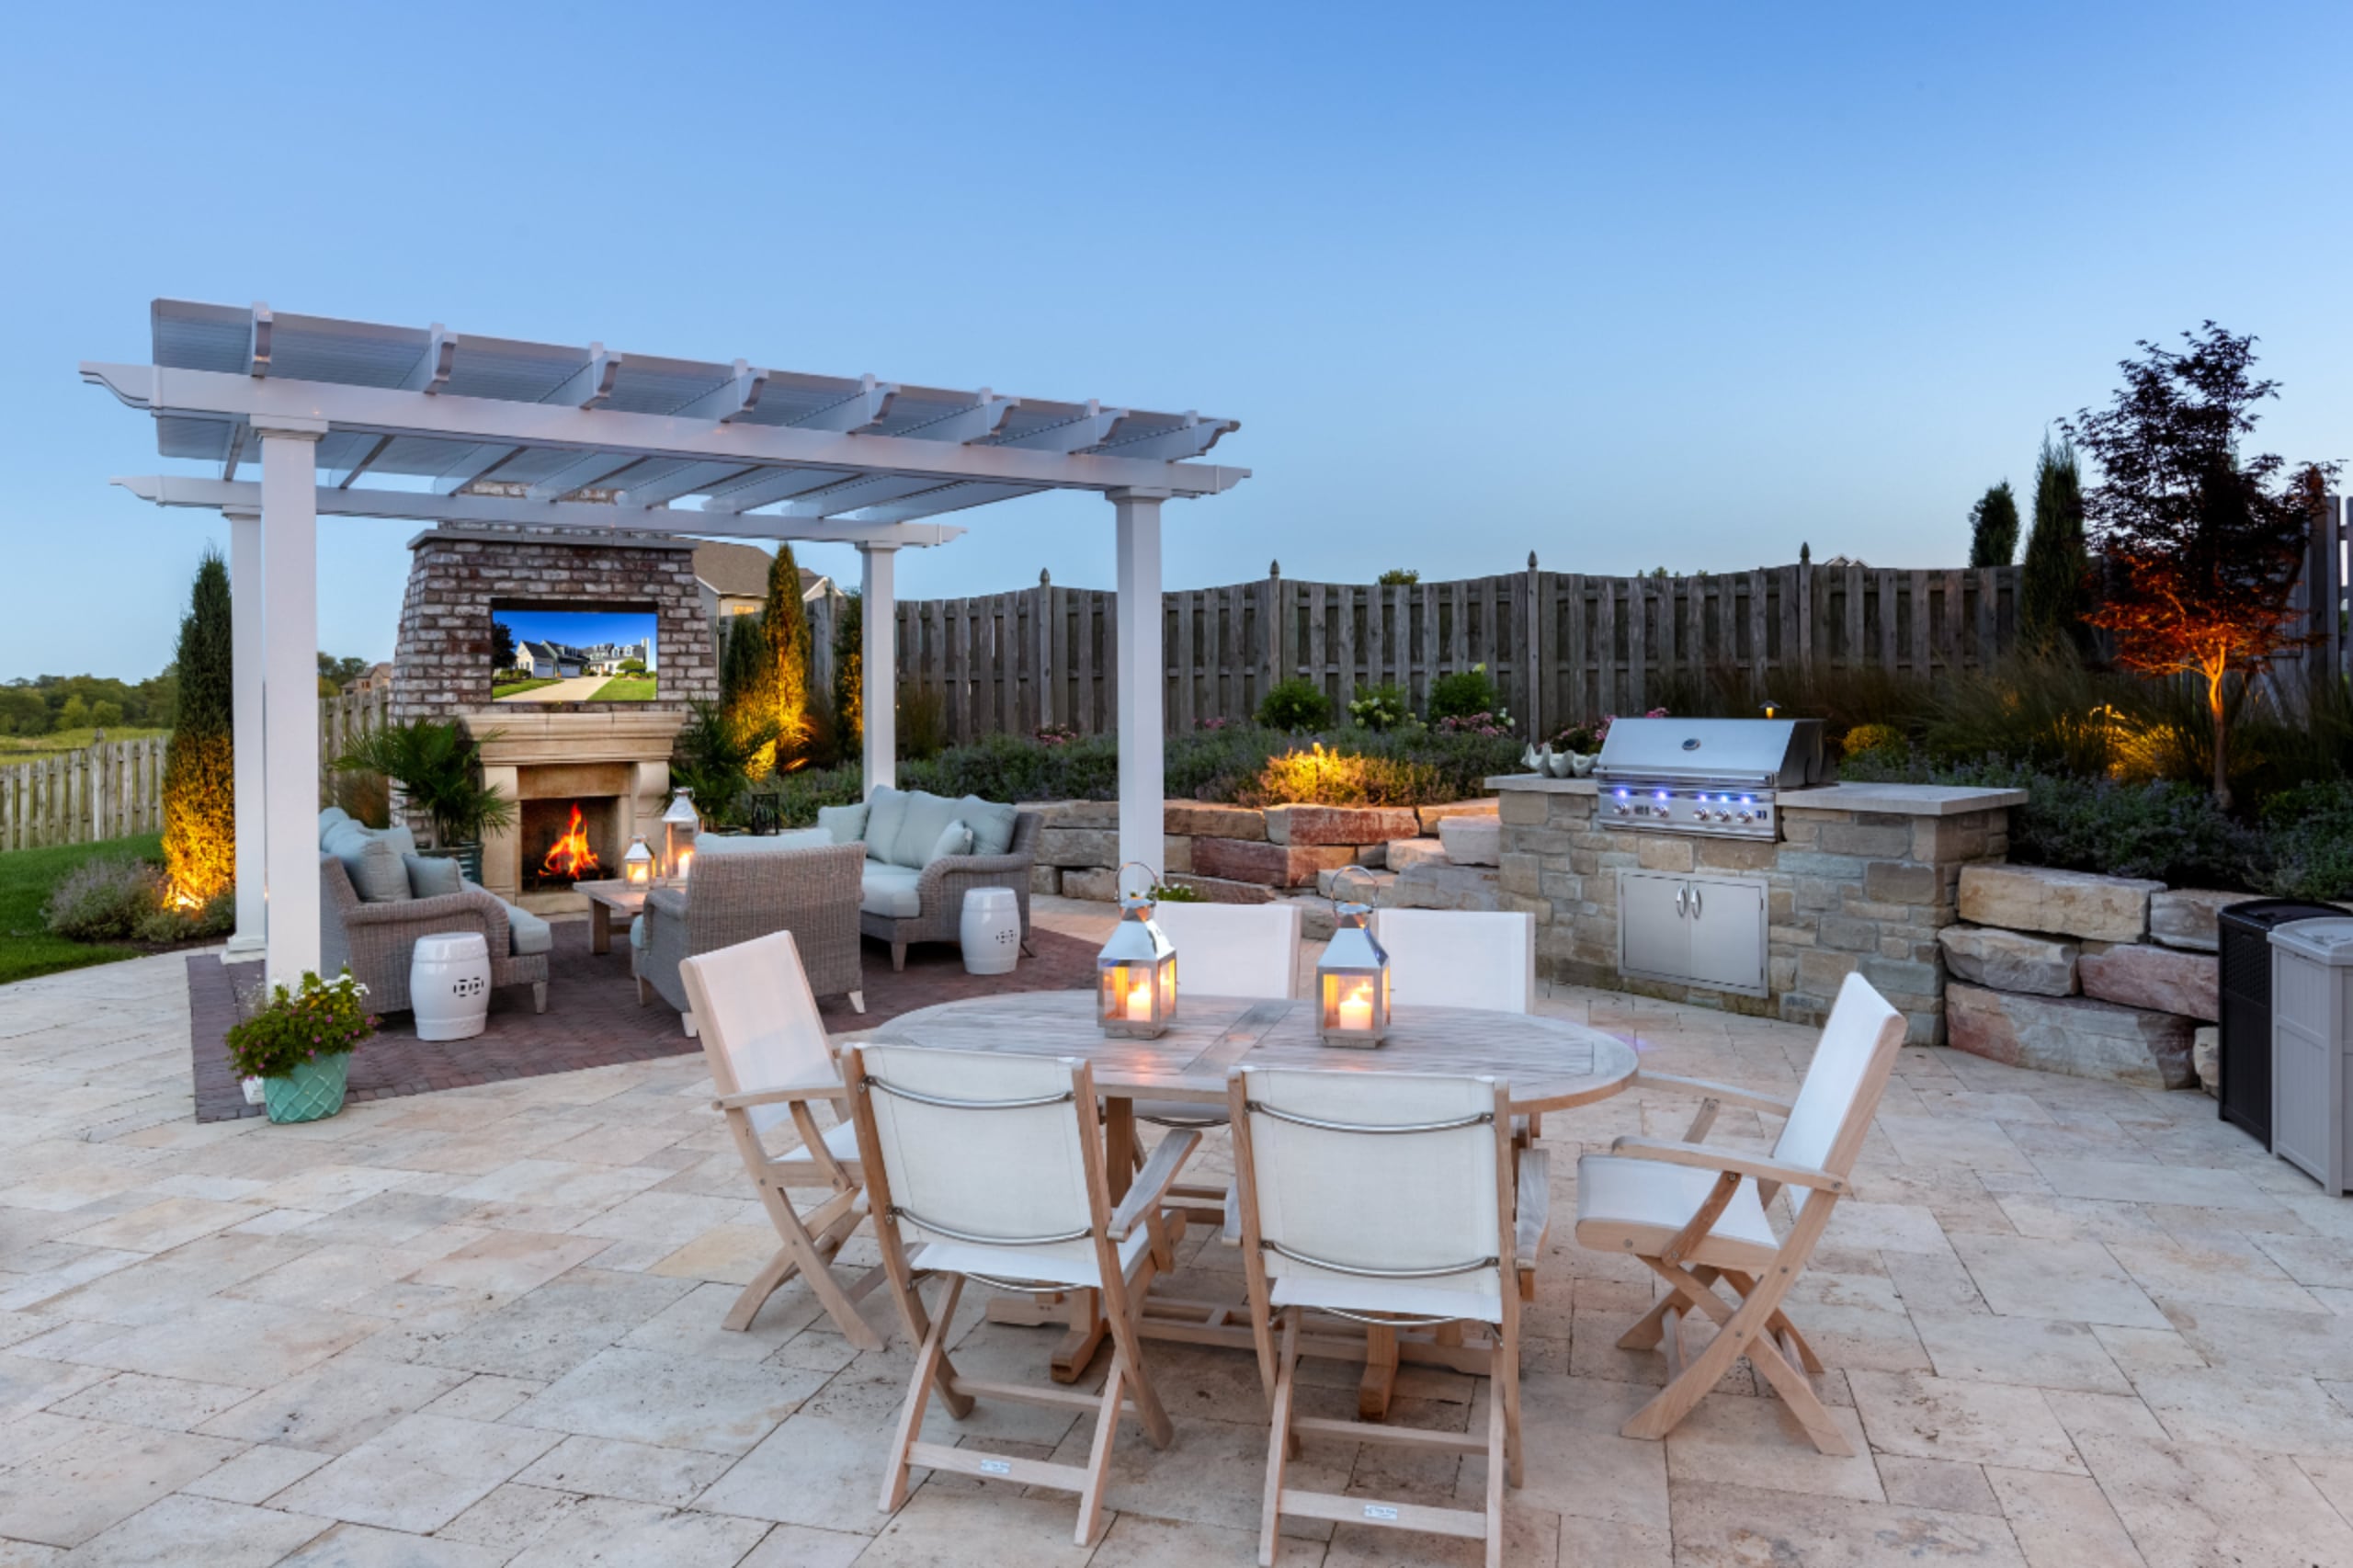 This outdoor space has a pergola covering a seating area with two couches, a chair, a fireplace and side tables. There is an eating area with six chairs and two lanterns on the table.